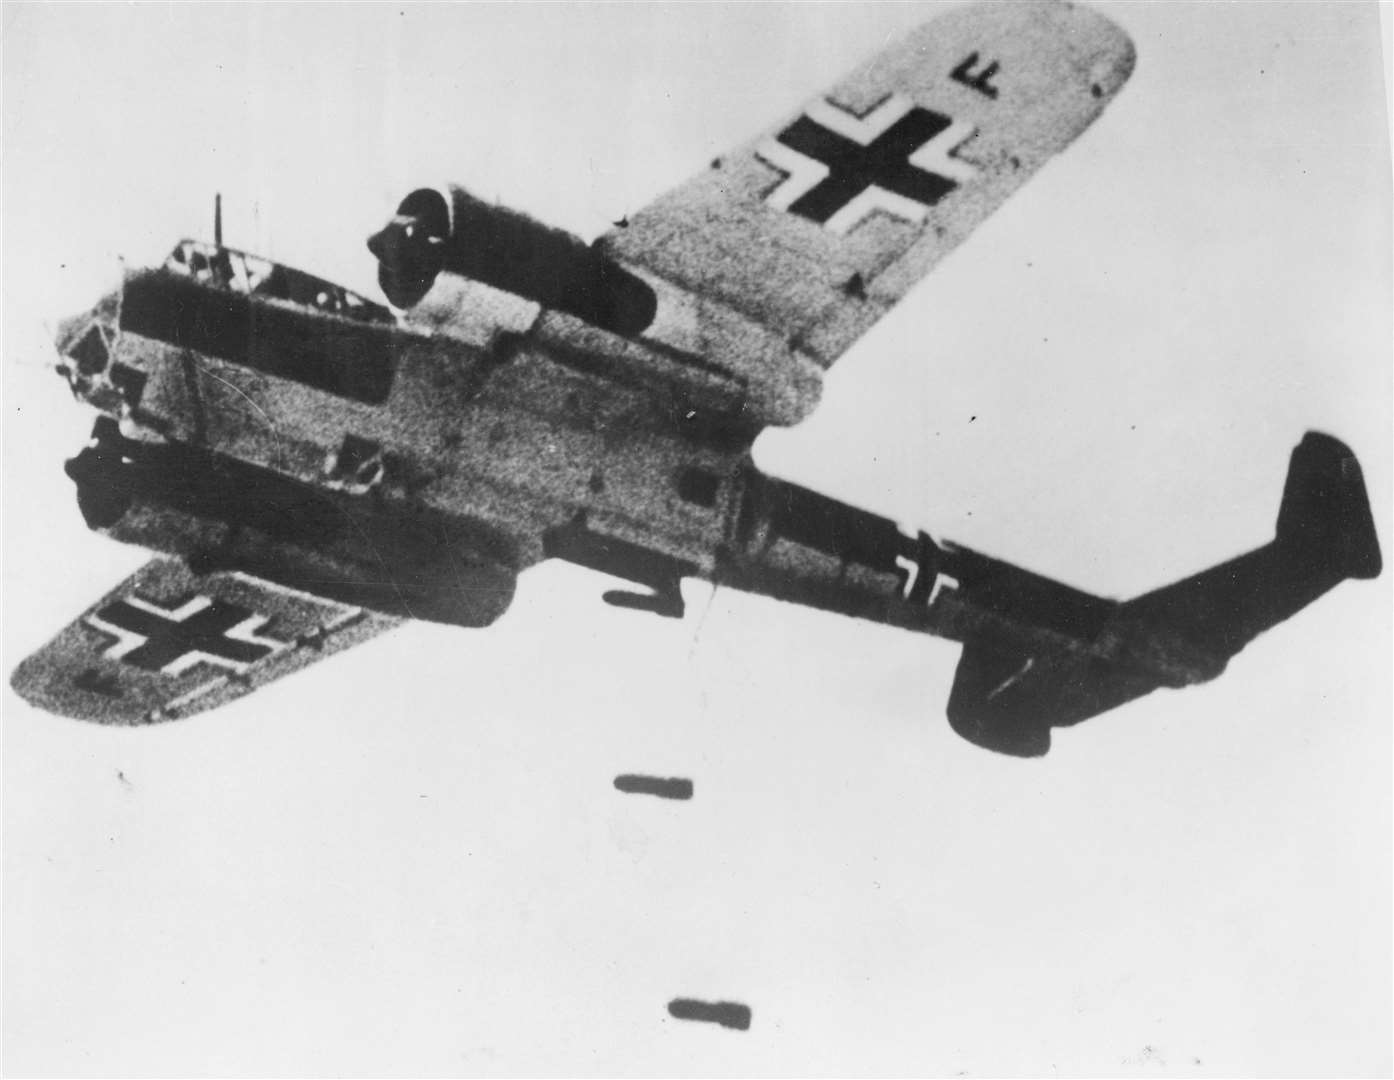 A Dornier 17 bomber - known as The Flying Pencil